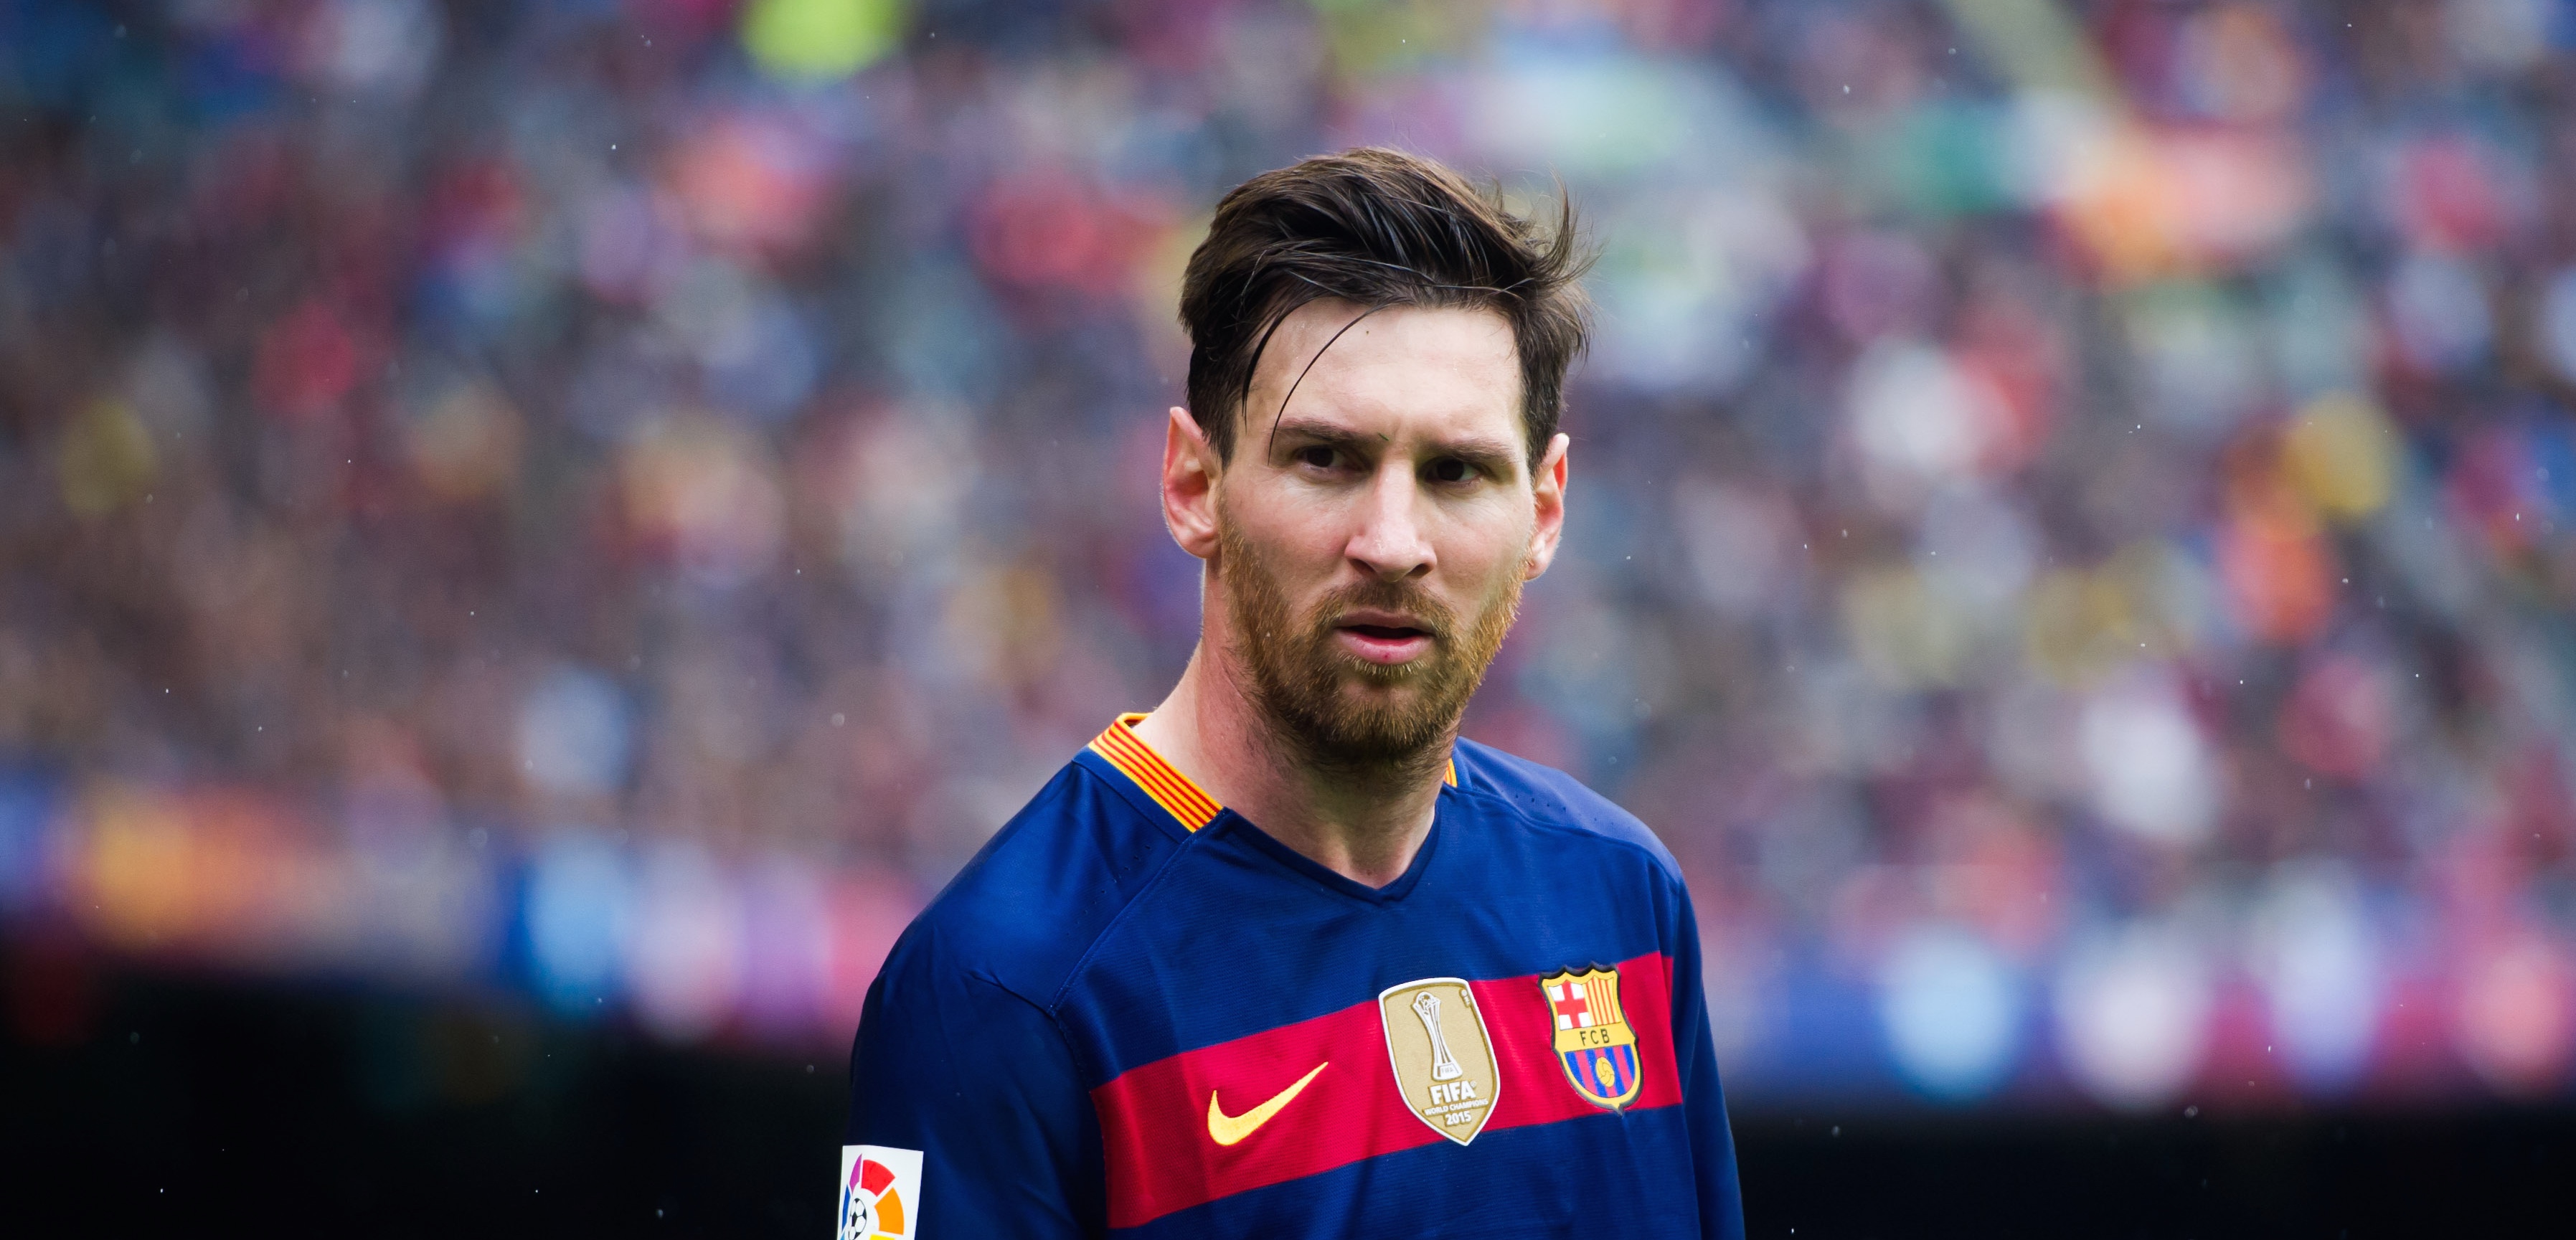 Lionel Messi looks on during a La Liga match between FC Barcelona and RCD Espanyol. Photo by Alex Caparros/Getty Images